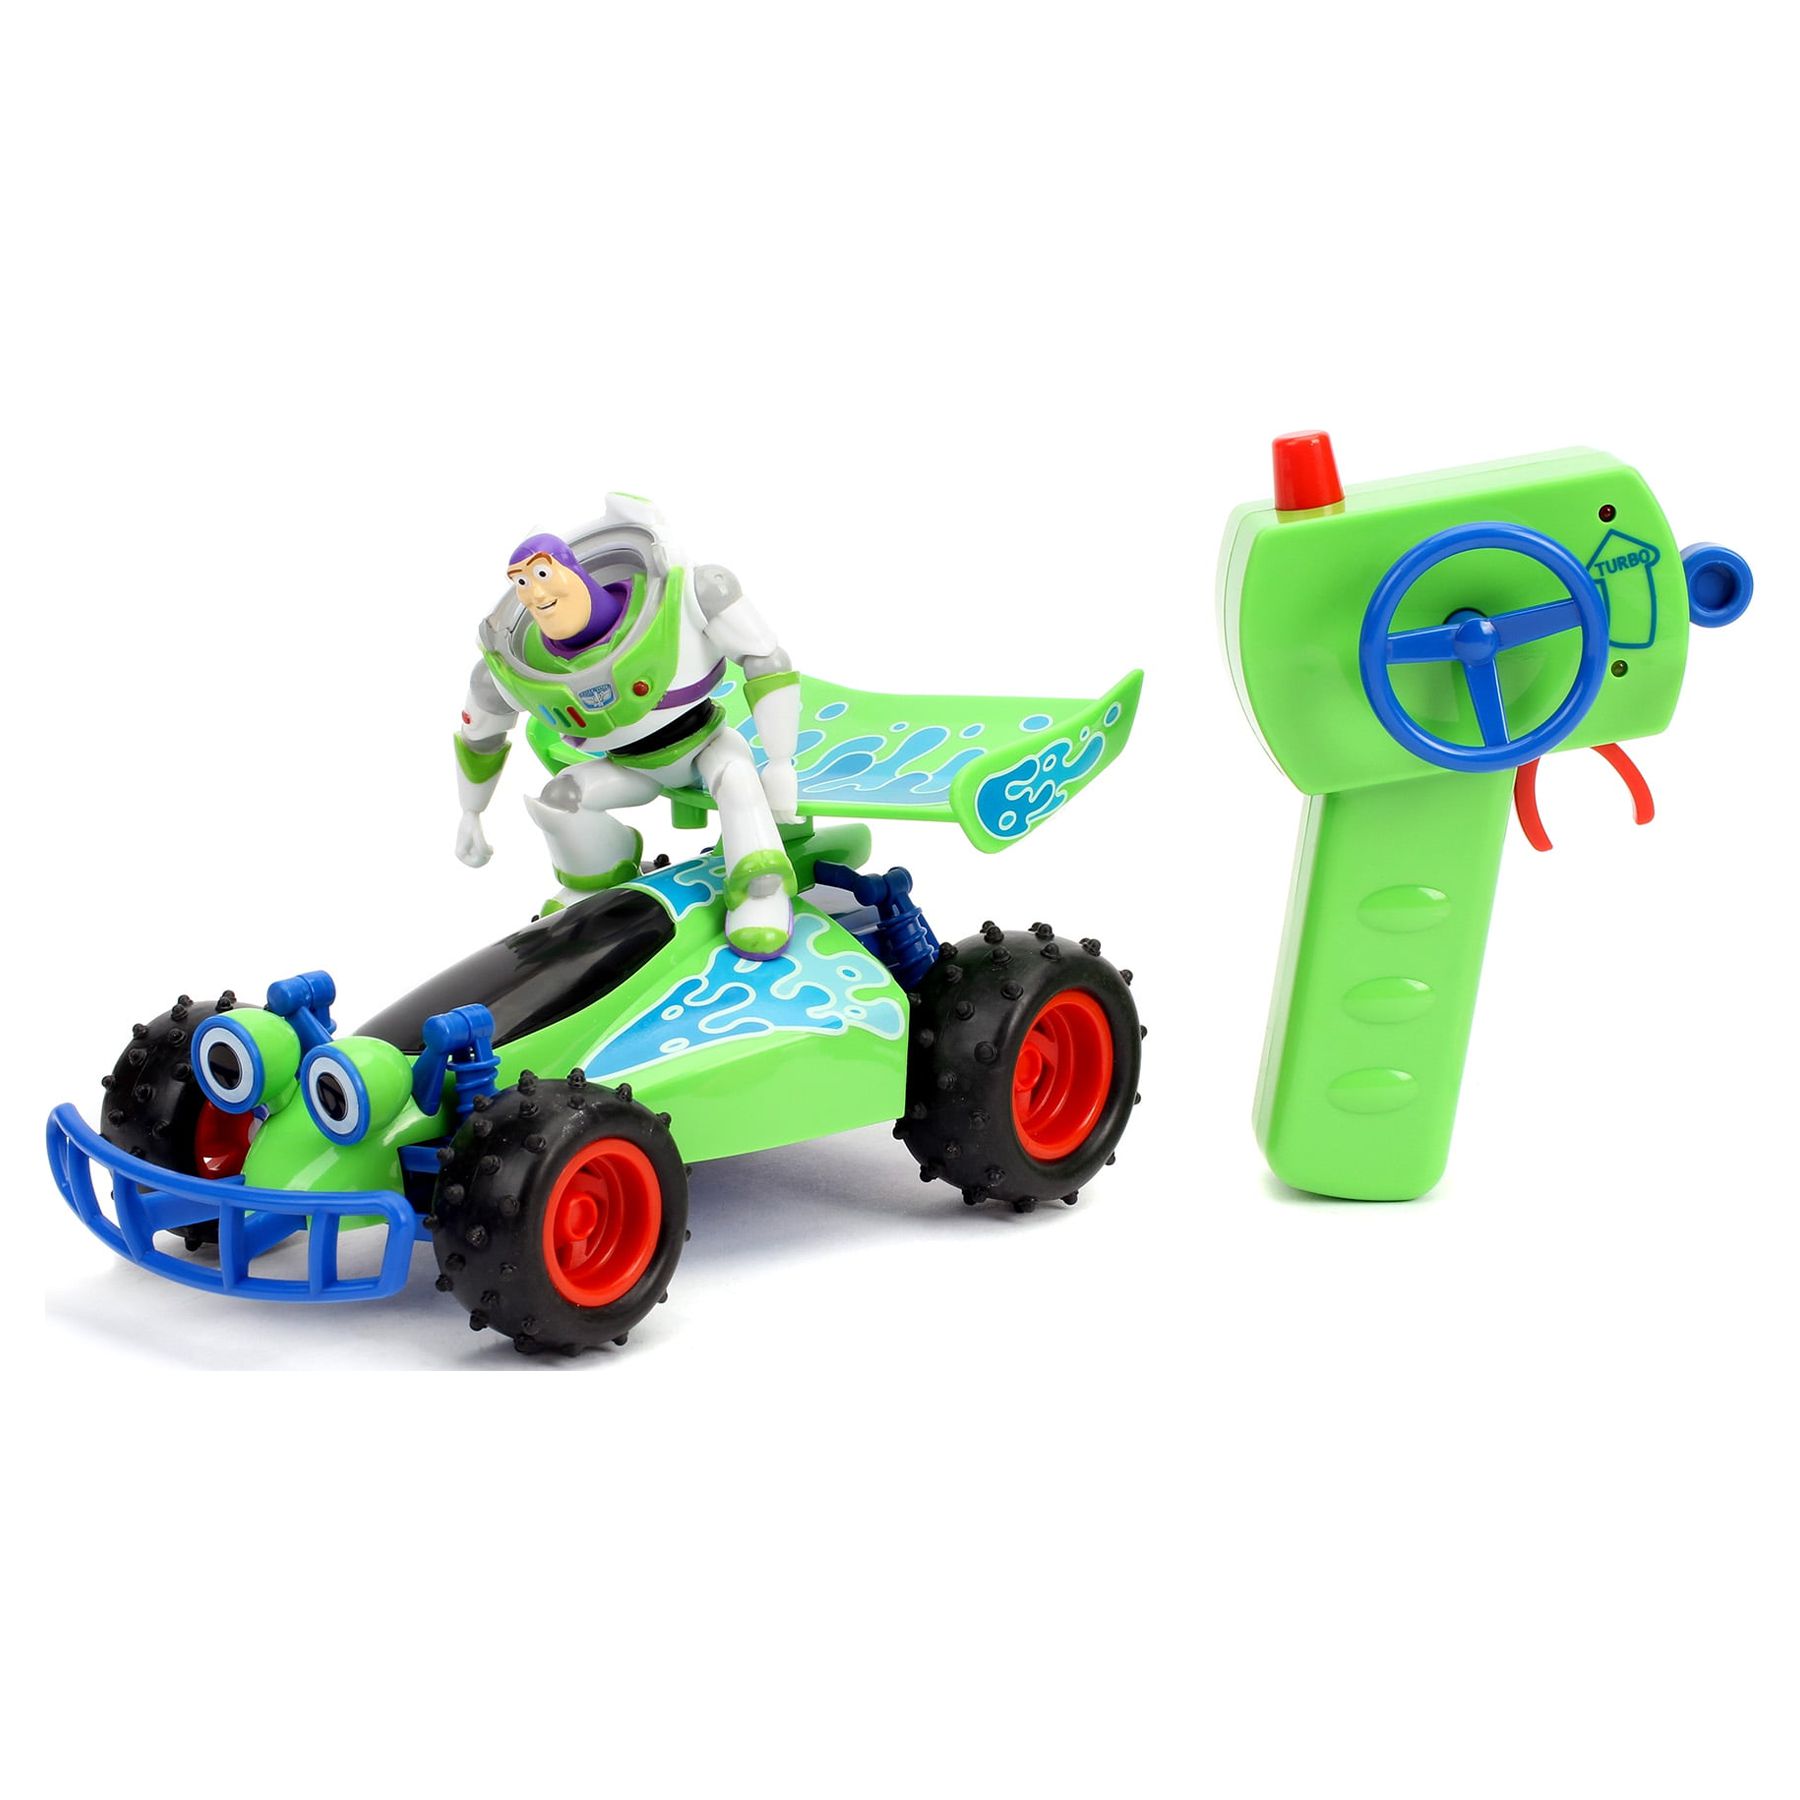 Disney Pixar Toy Story (1:24) Turbo Buggy Battery-Powered RC Car, Buzz Lightyear - image 1 of 2